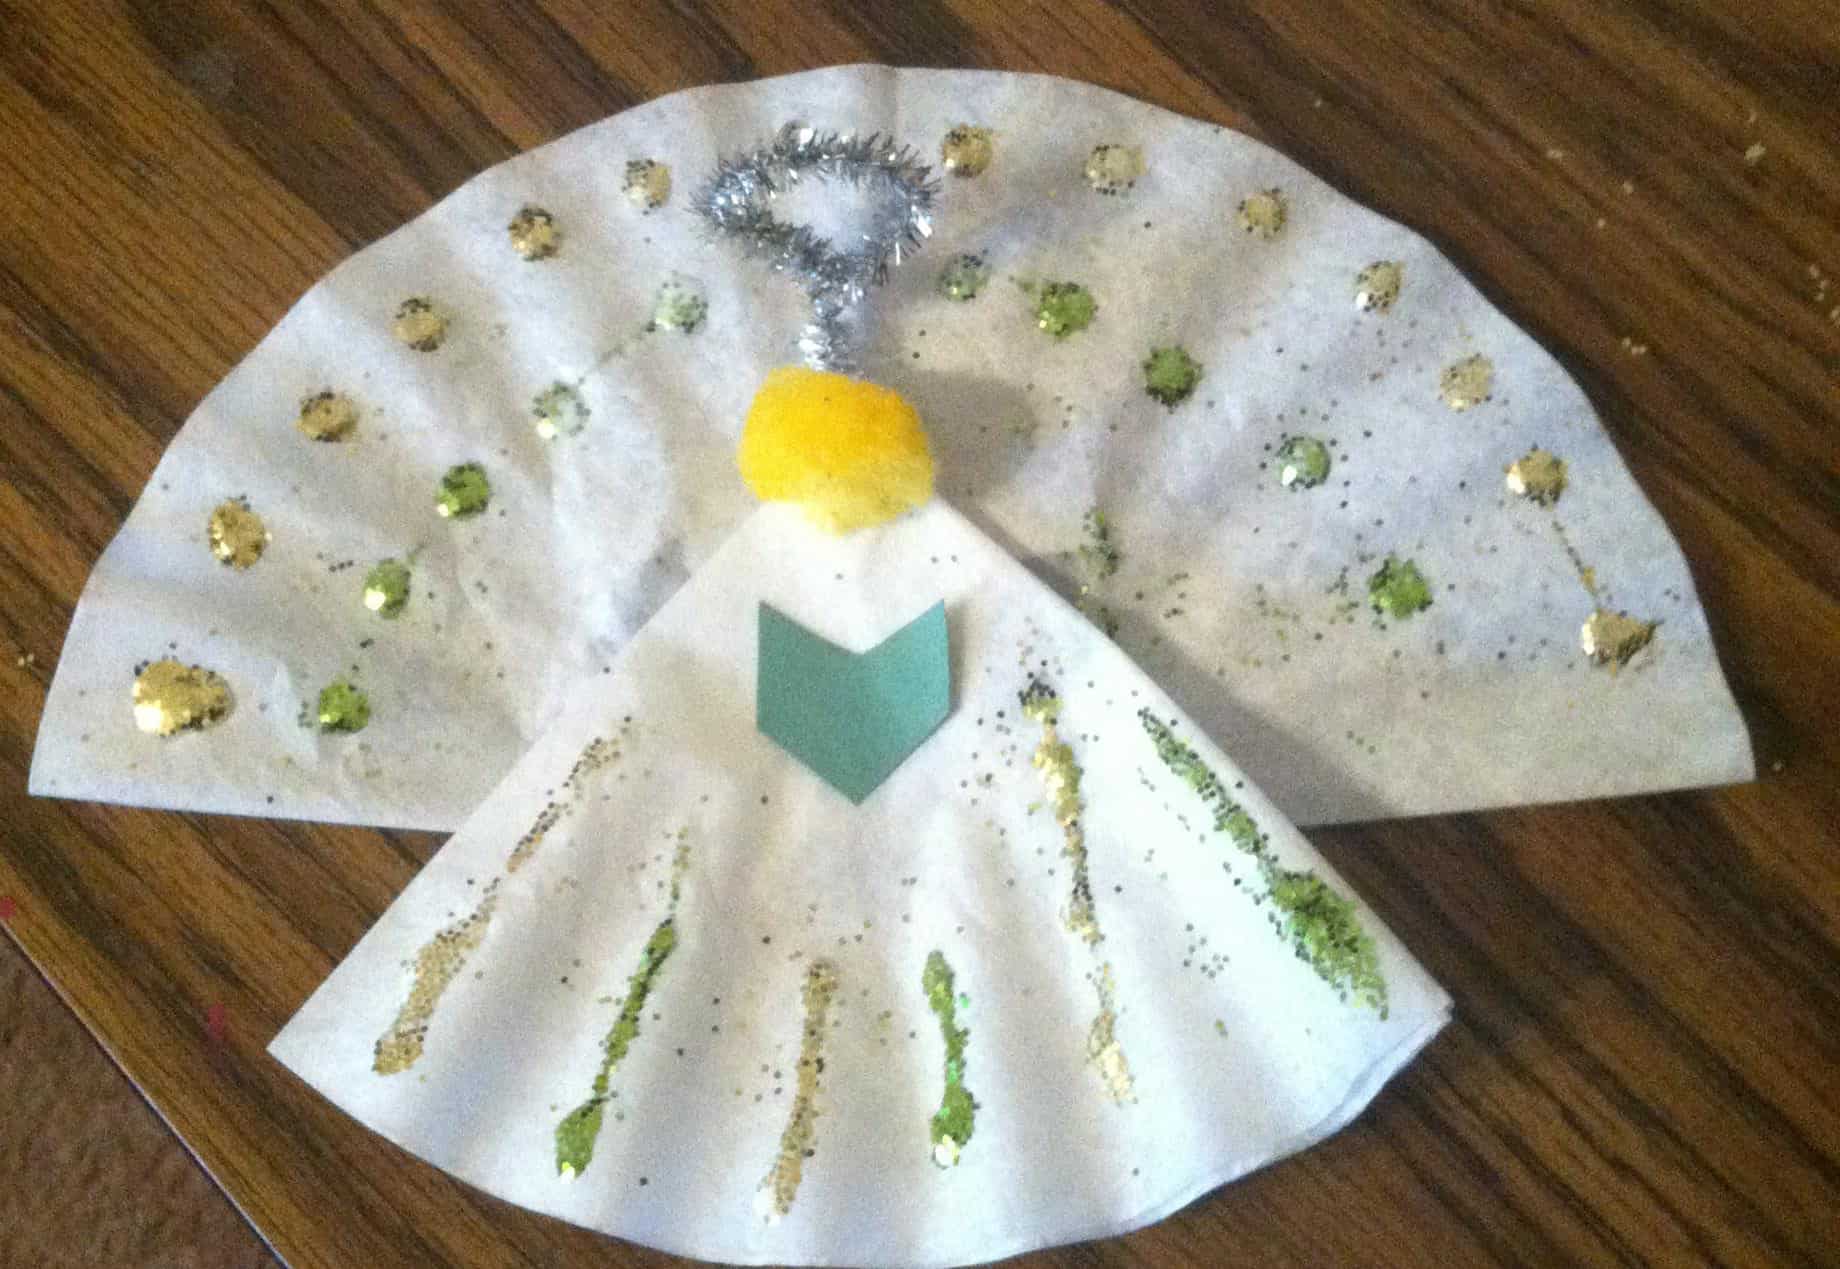 Fun Bible Crafts for Kids on